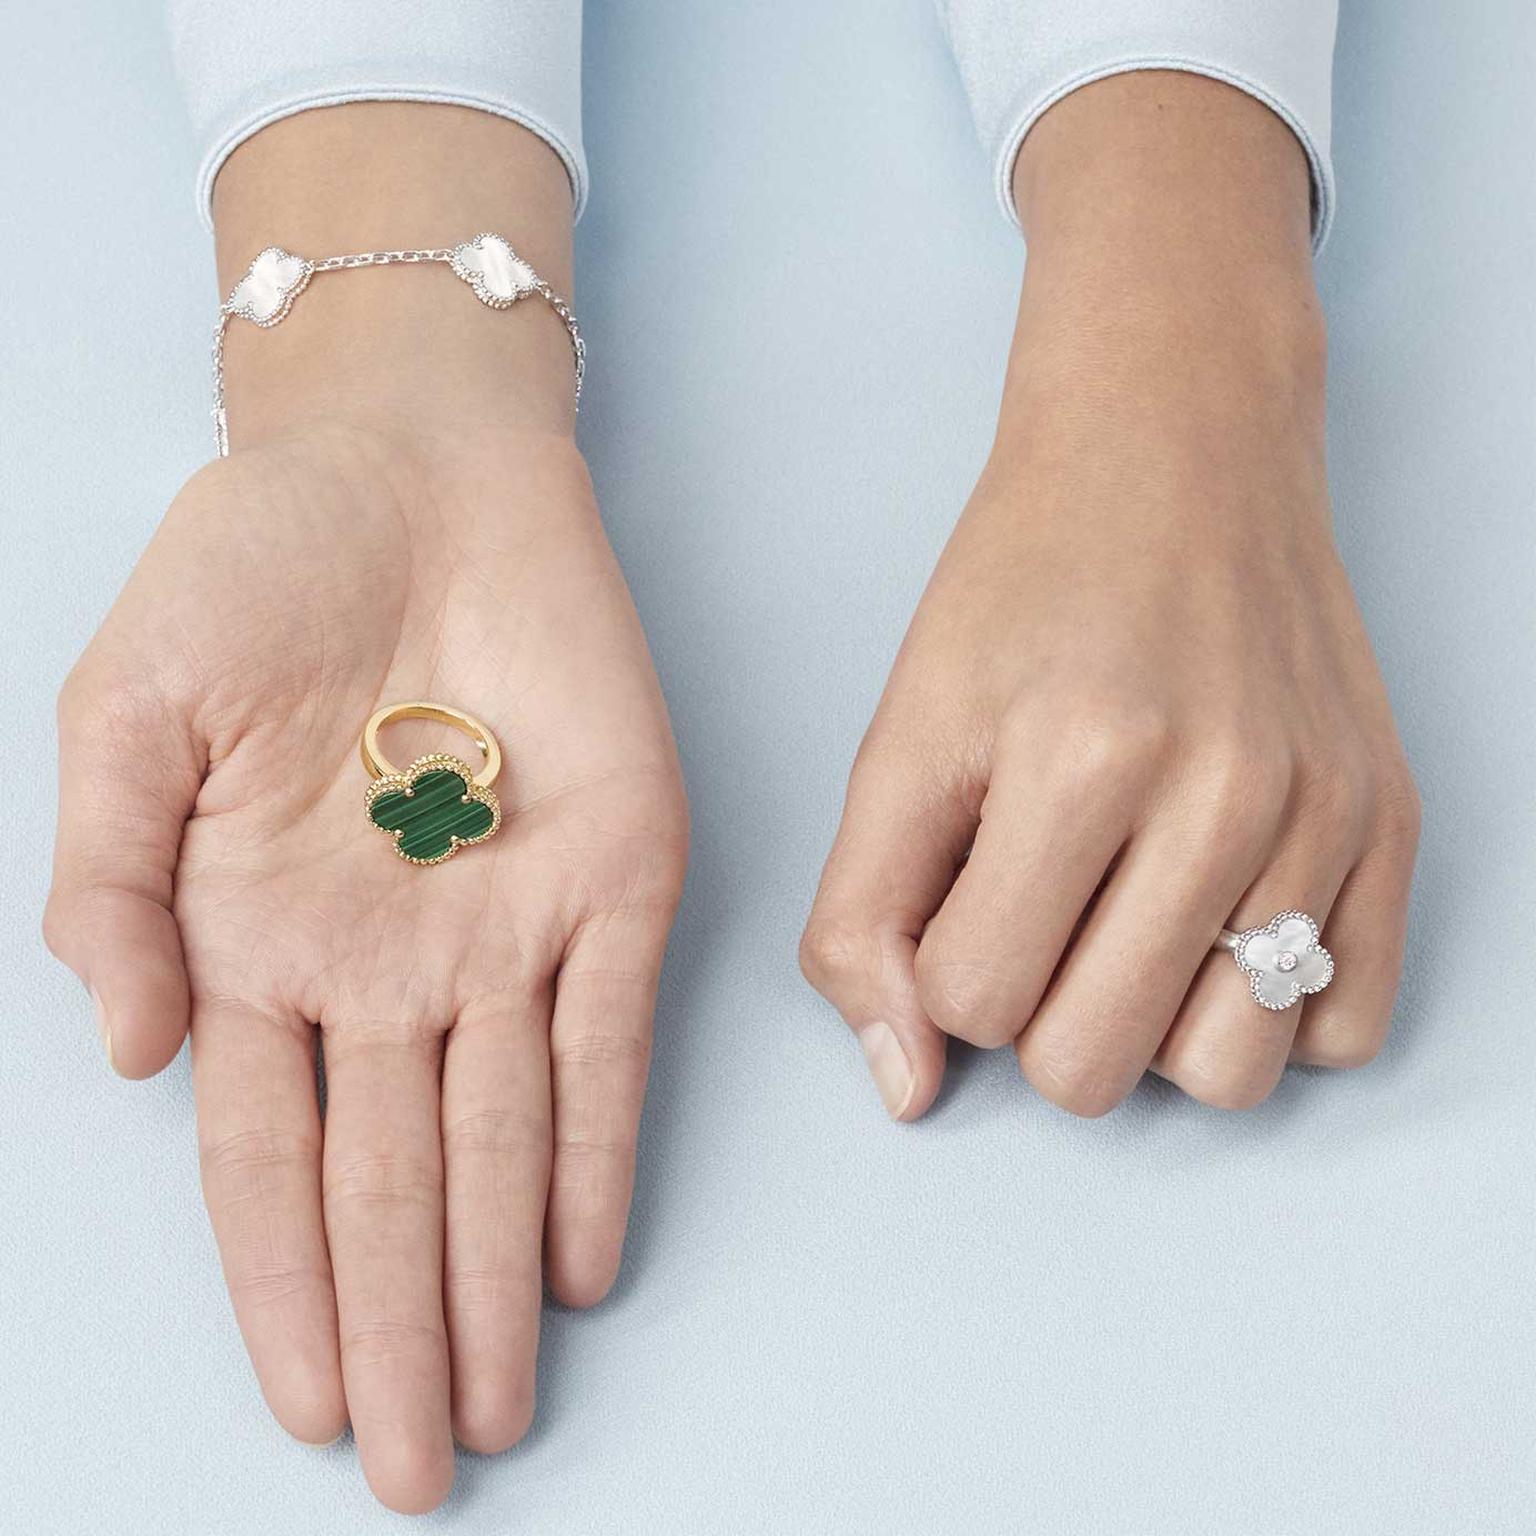 Van Cleef Arpels Alhambra malachite ring, mother of pearl ring and bracelet.